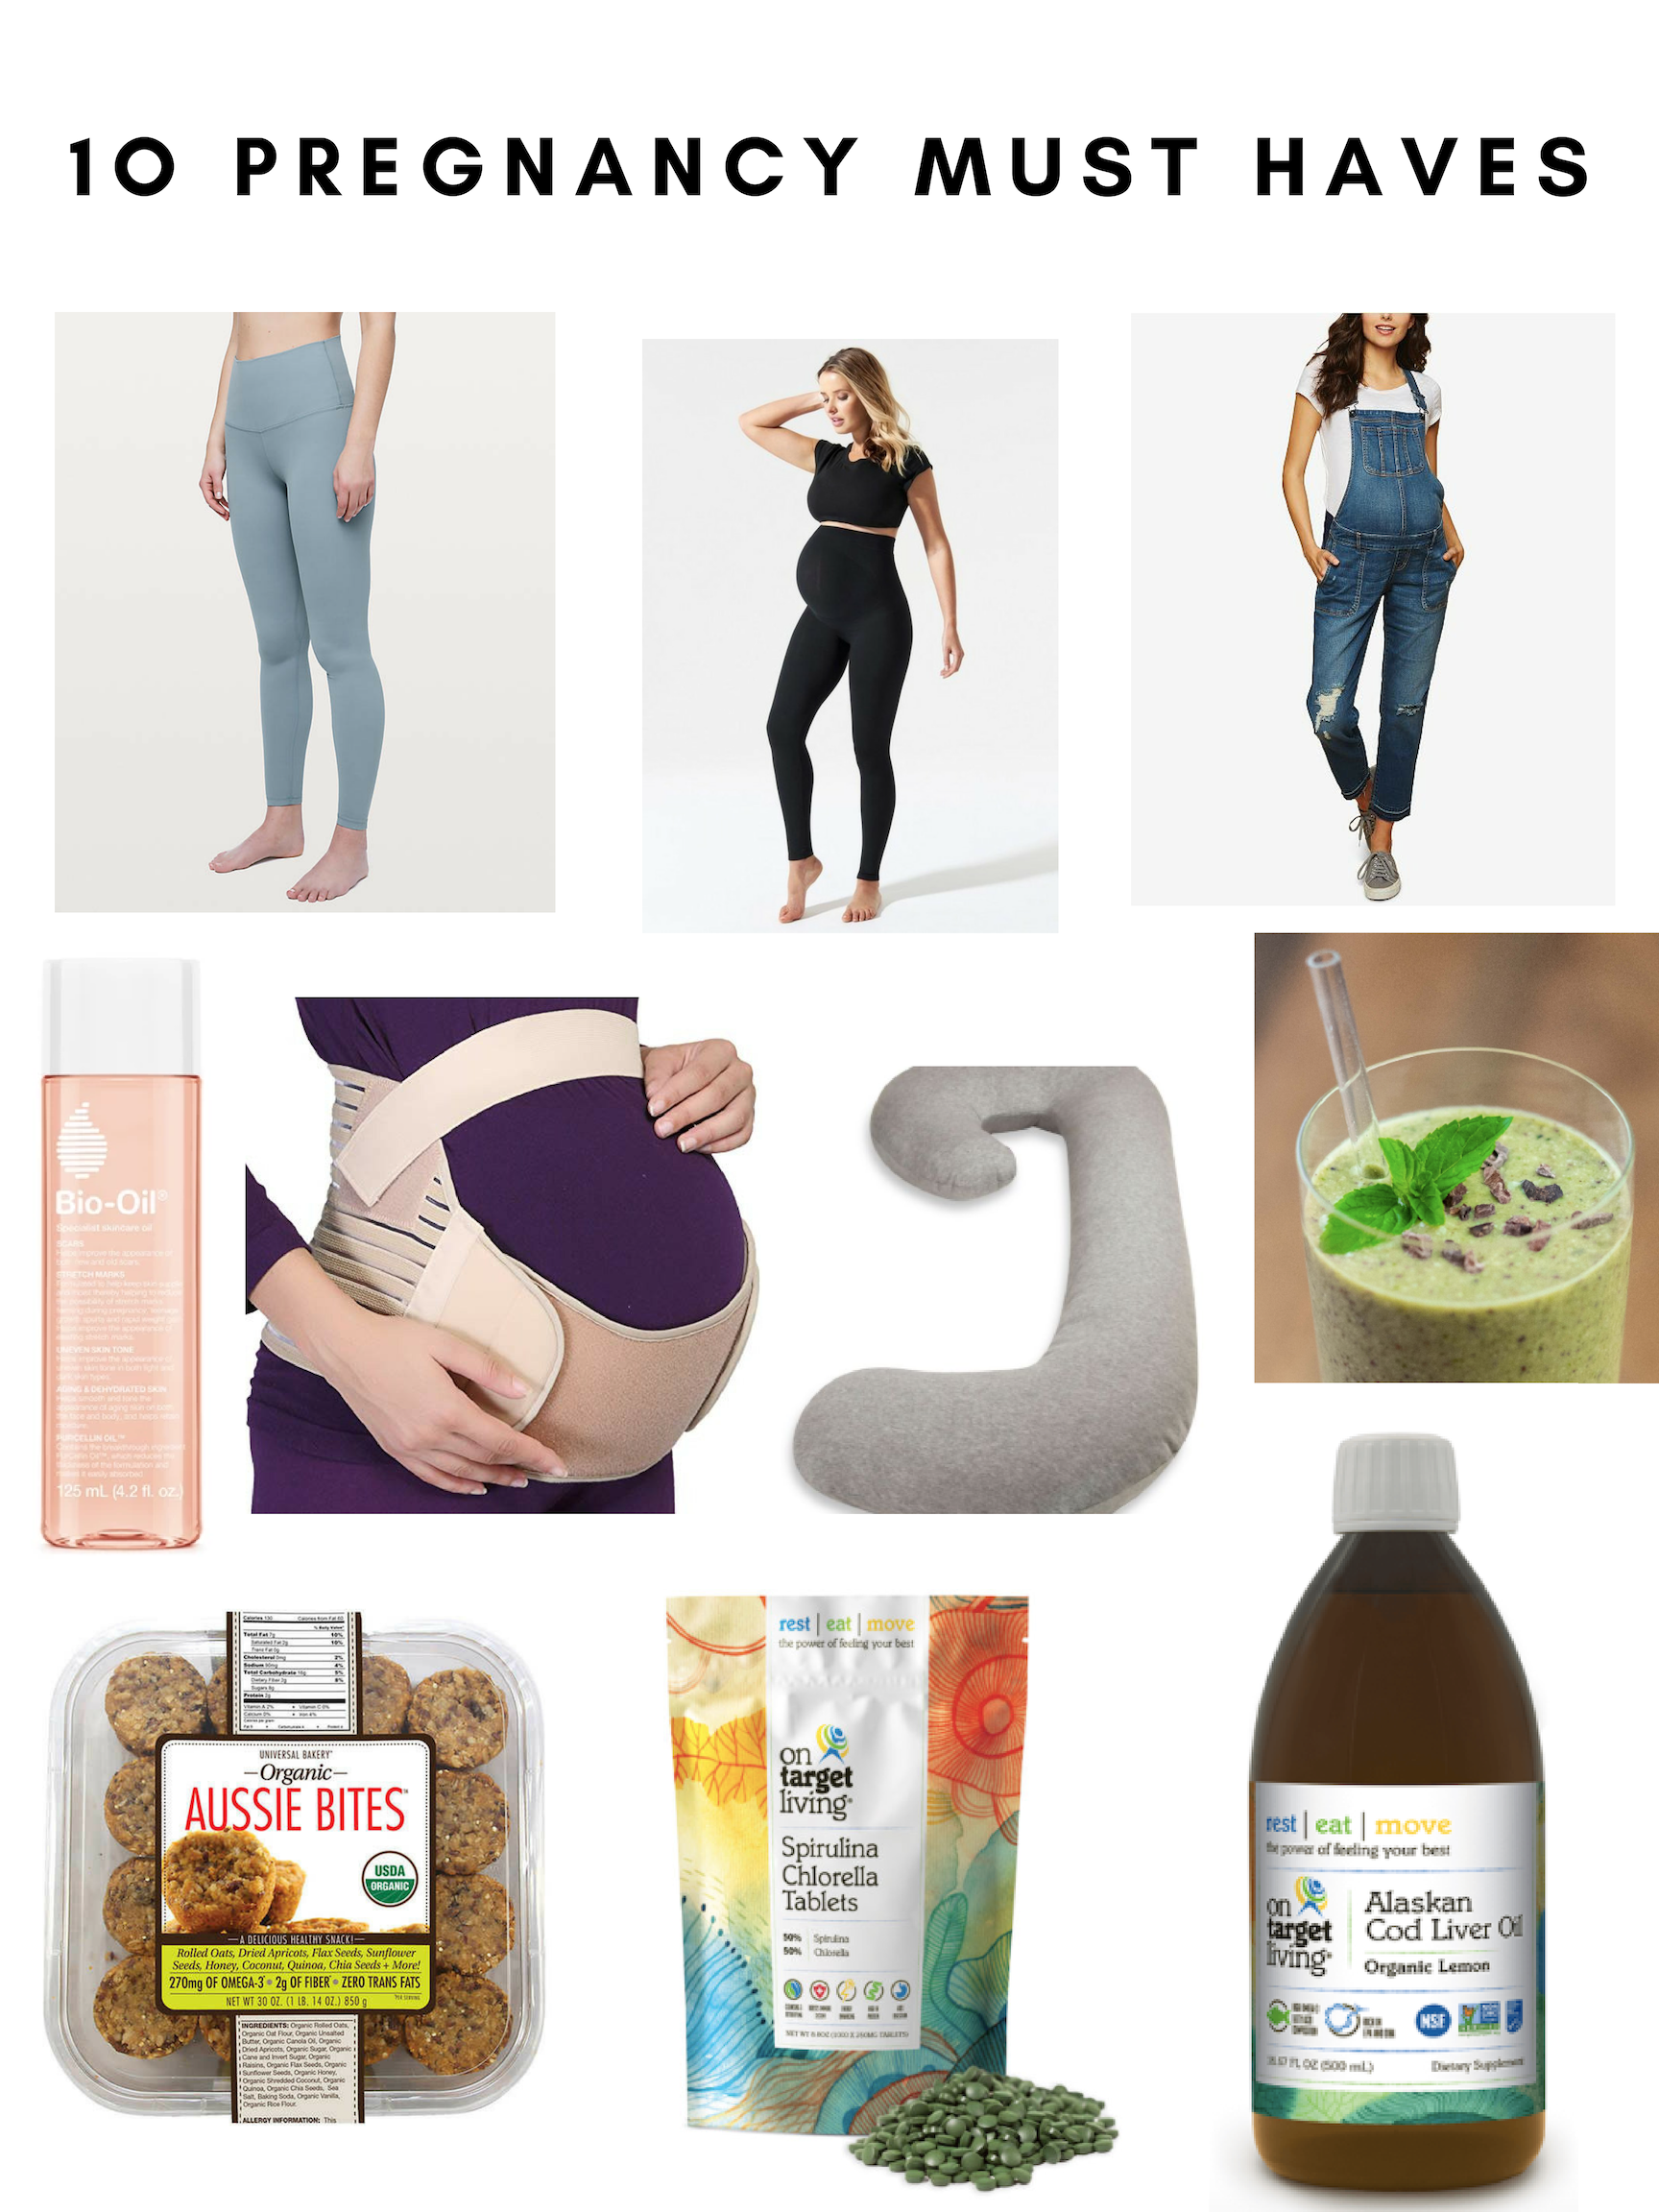 Pregnancy Essentials: 20 Must Have Products for Pregnant Women